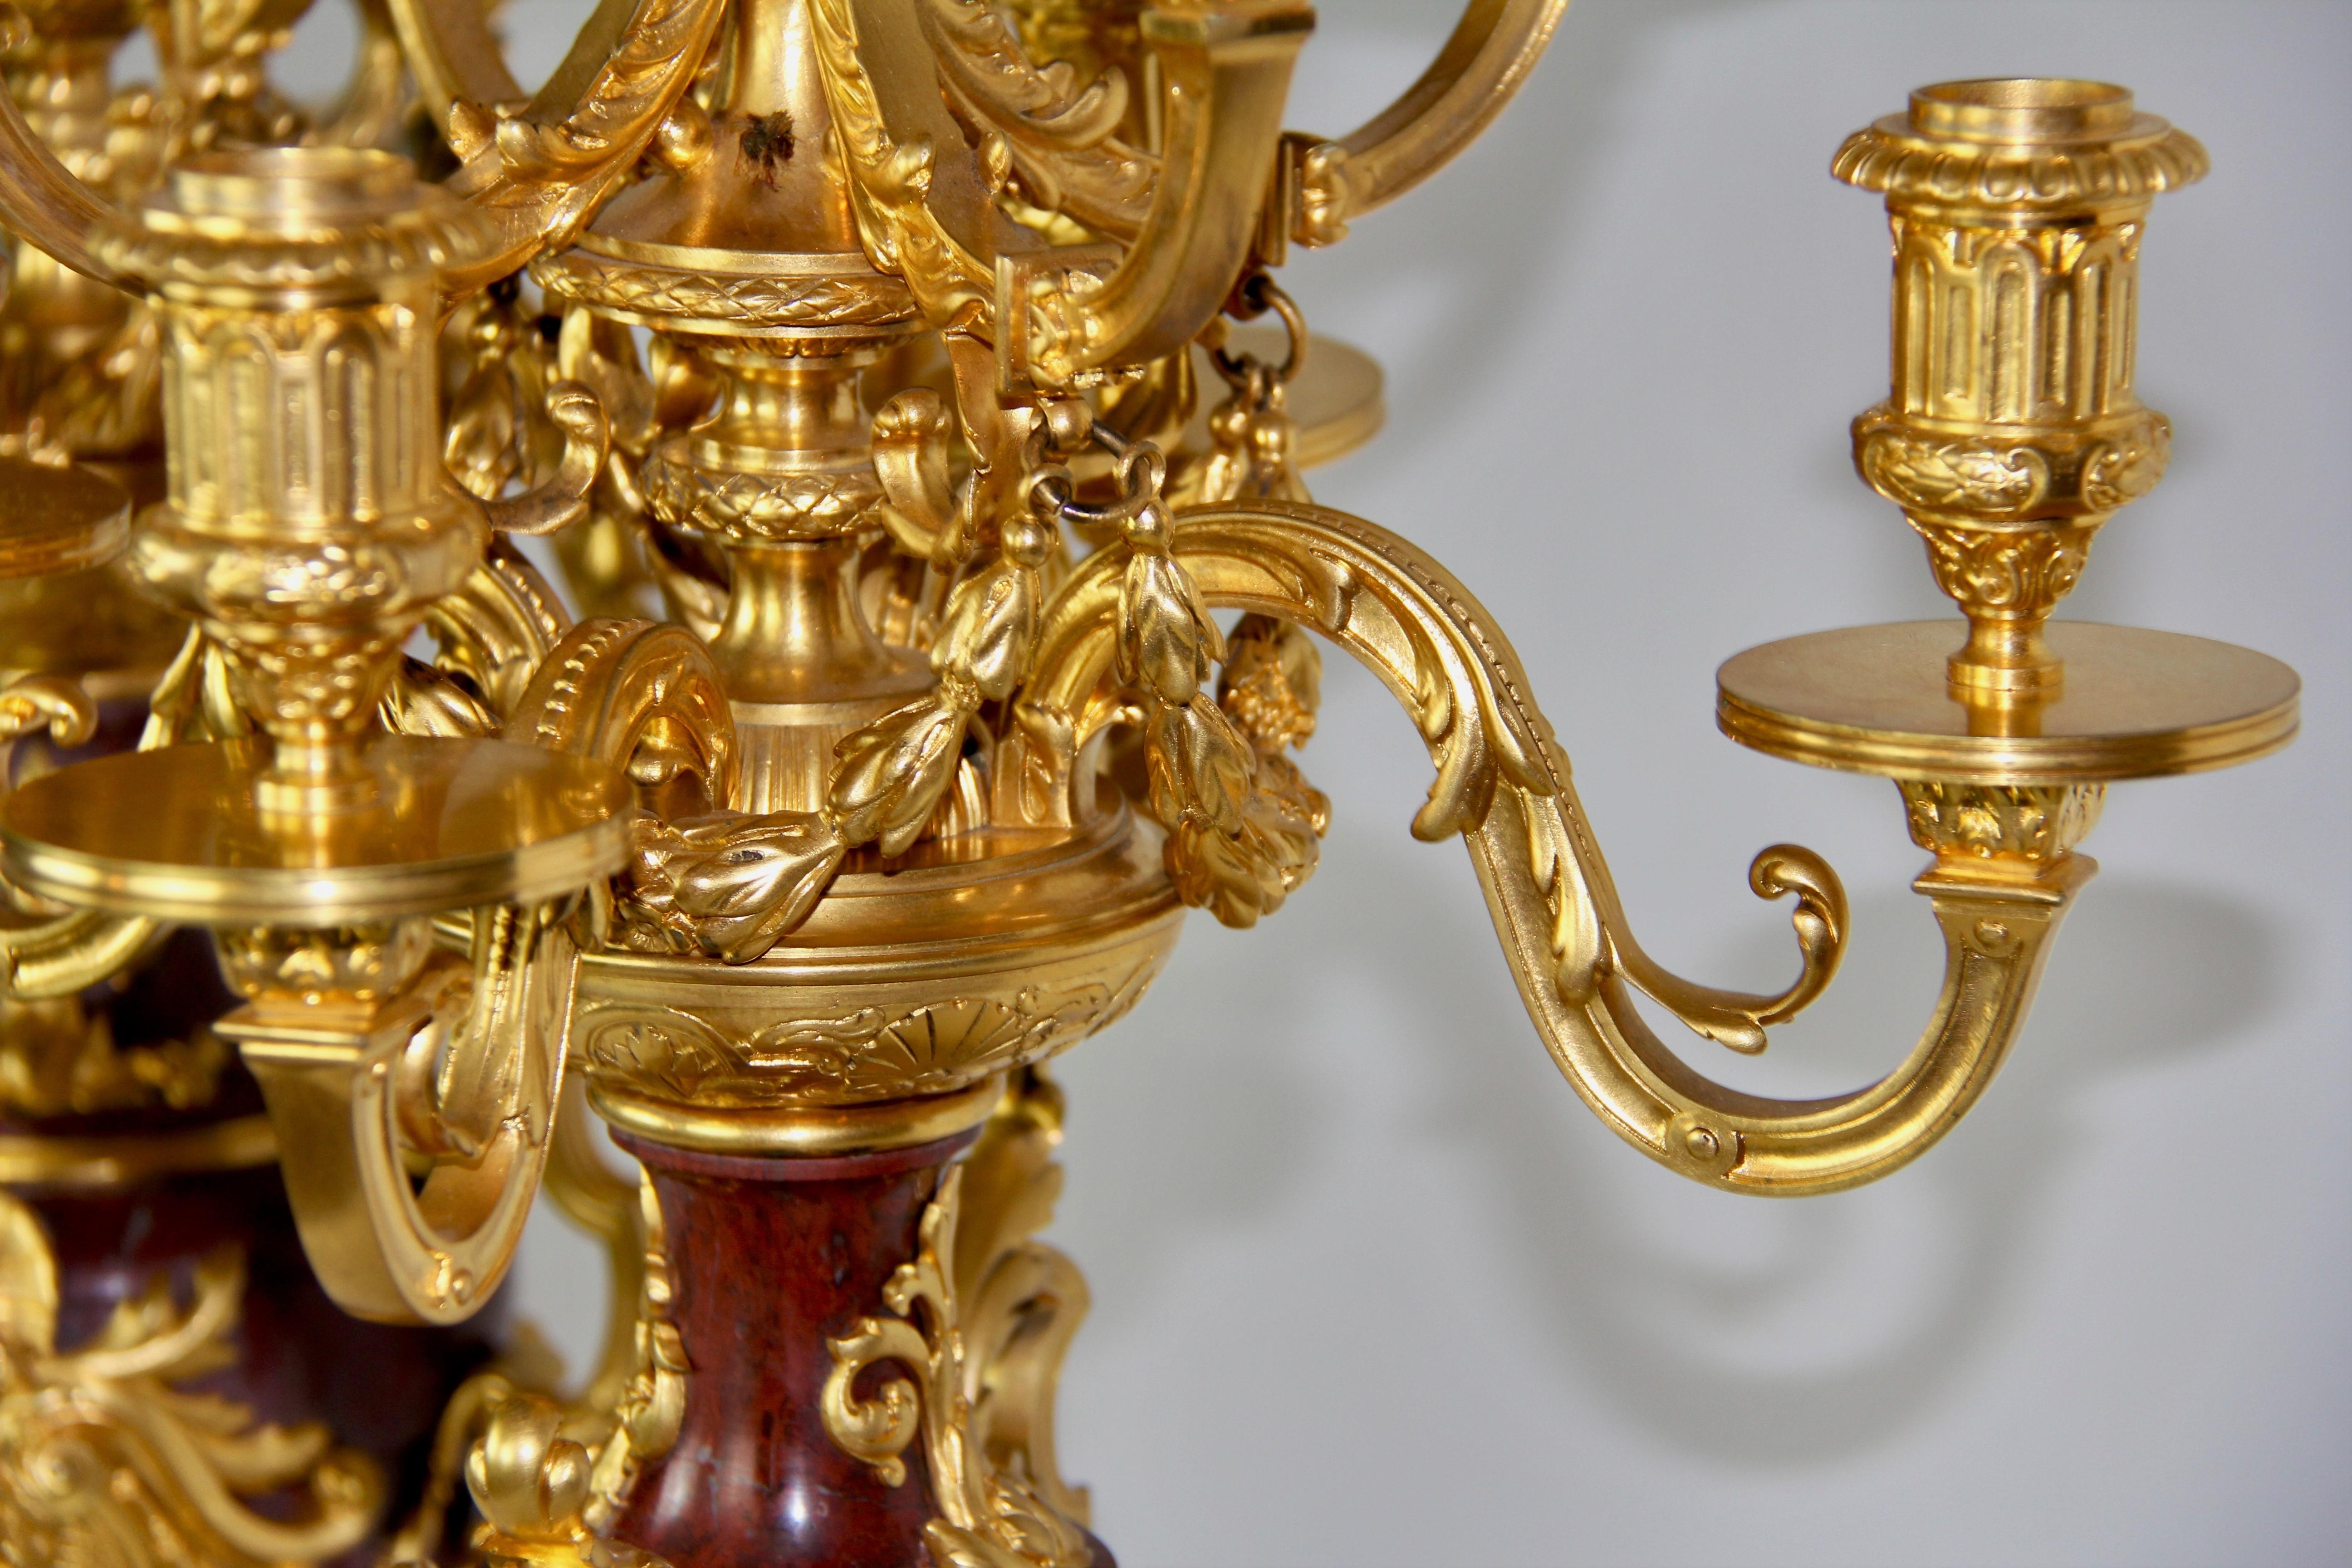 Pair of Doré Bronze Mtd Rouge Marble 9-Arm Candelabras, Signed by Barbedienne For Sale 3